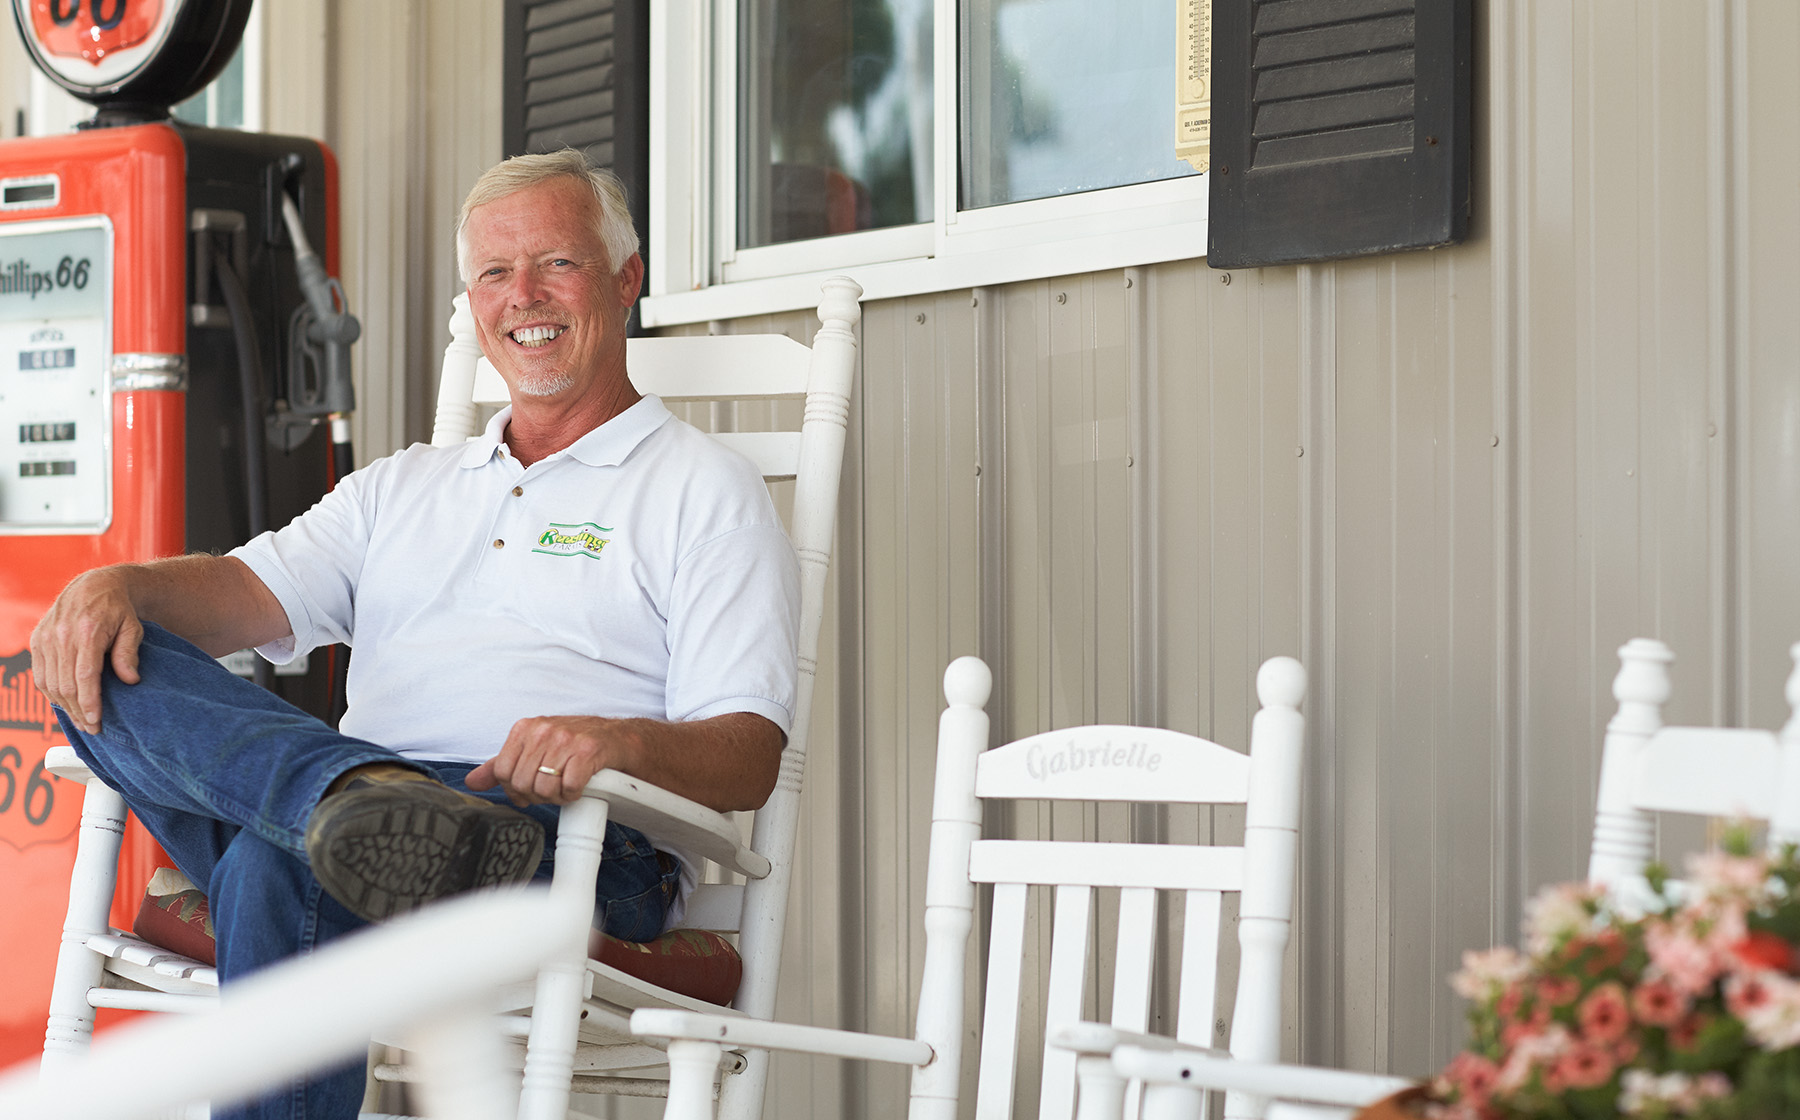 Image of Keesling Farms Growers for Red Gold Tomatoes David Keesling in rocking chair on front porch